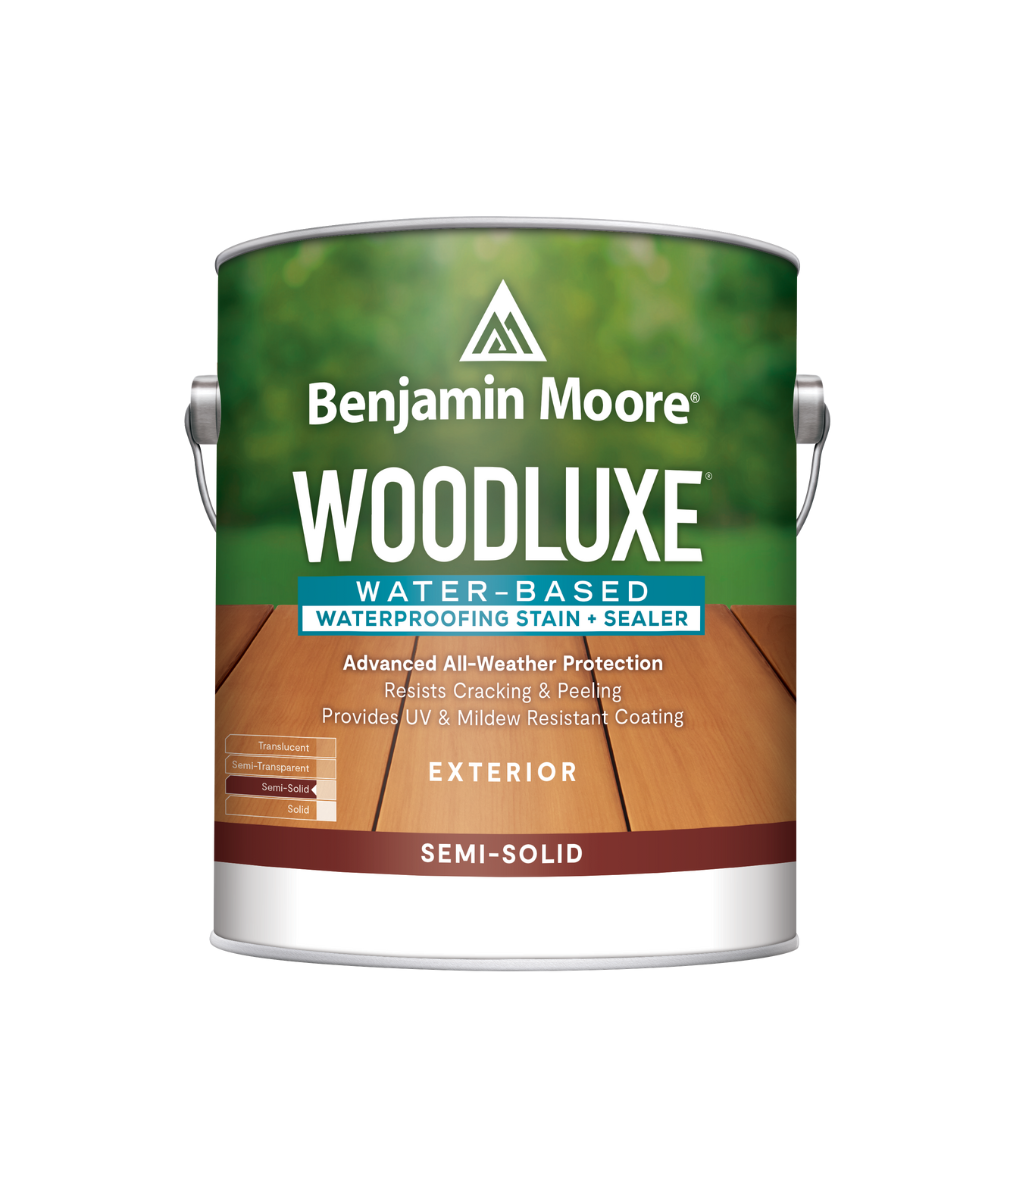 Benjamin Moore Woodluxe® Water-Based Semi-Solid Exterior Stain available at Southwestern Paint.